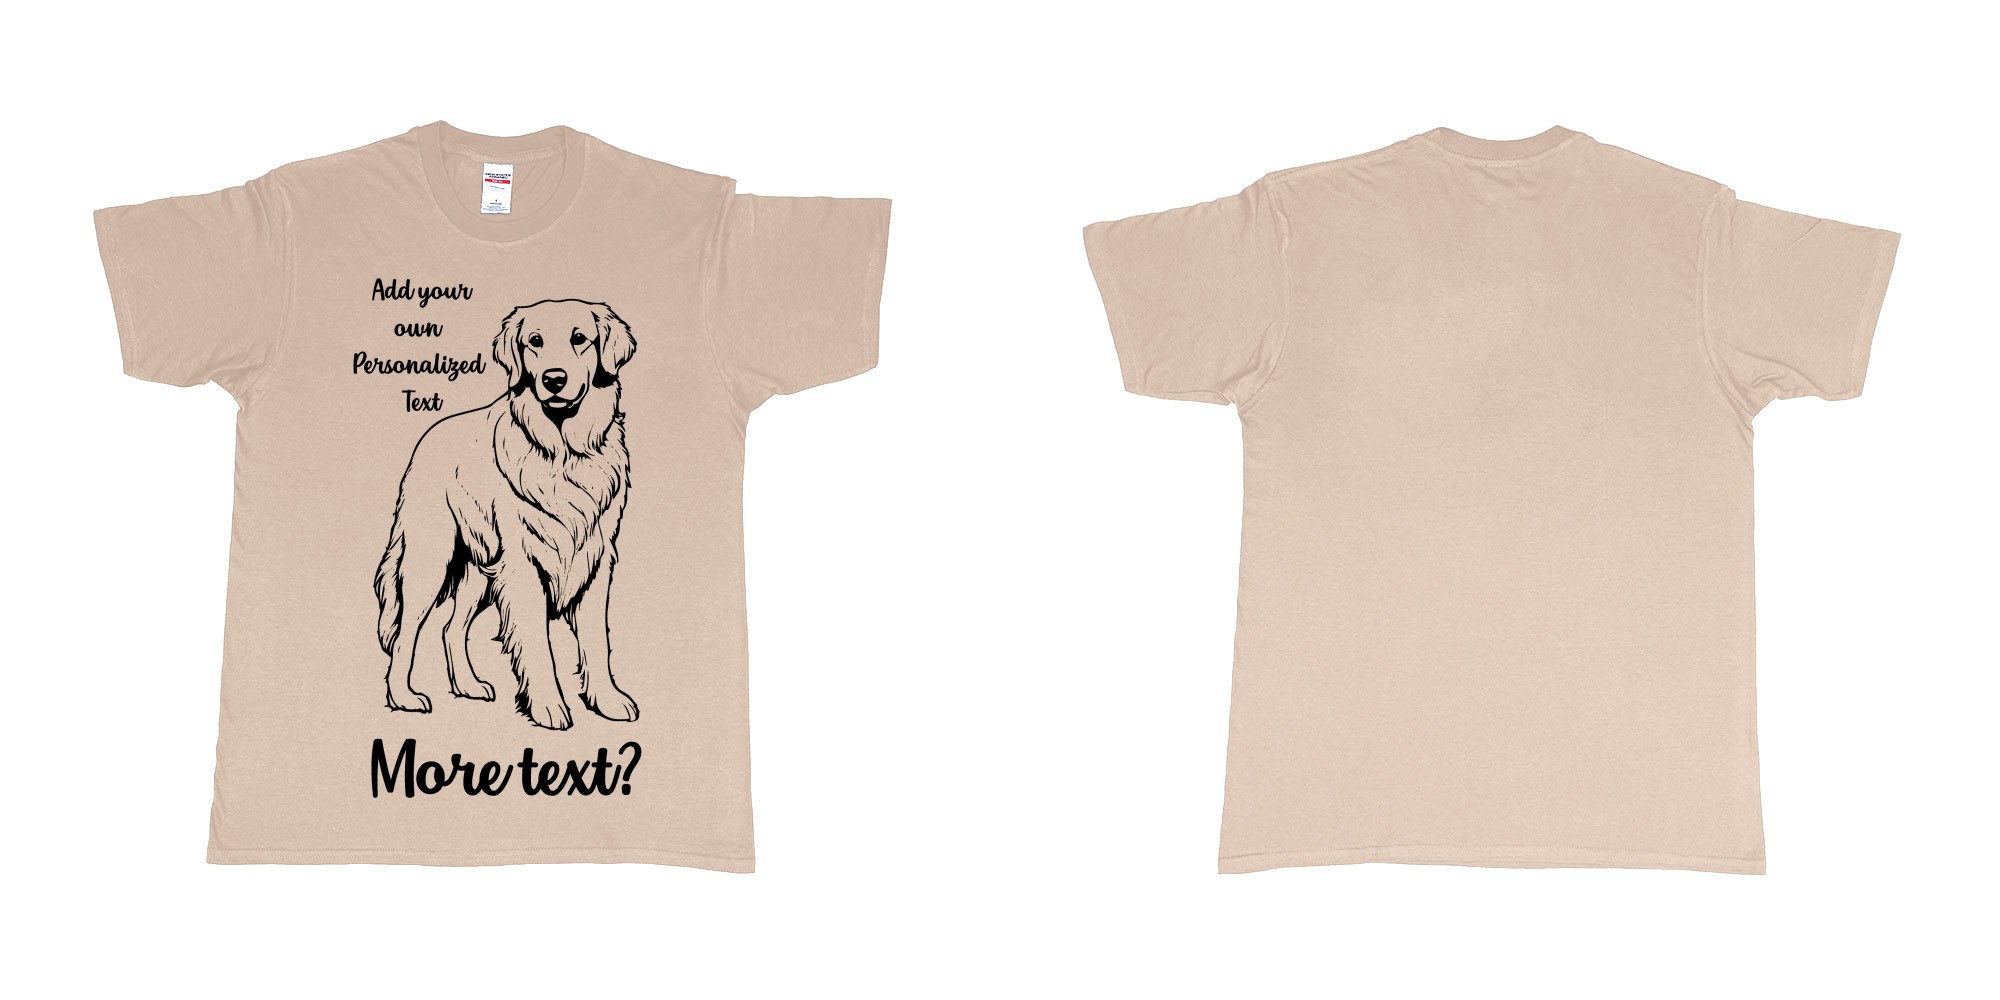 Custom tshirt design golden retriever dog breed personalized text in fabric color sand choice your own text made in Bali by The Pirate Way